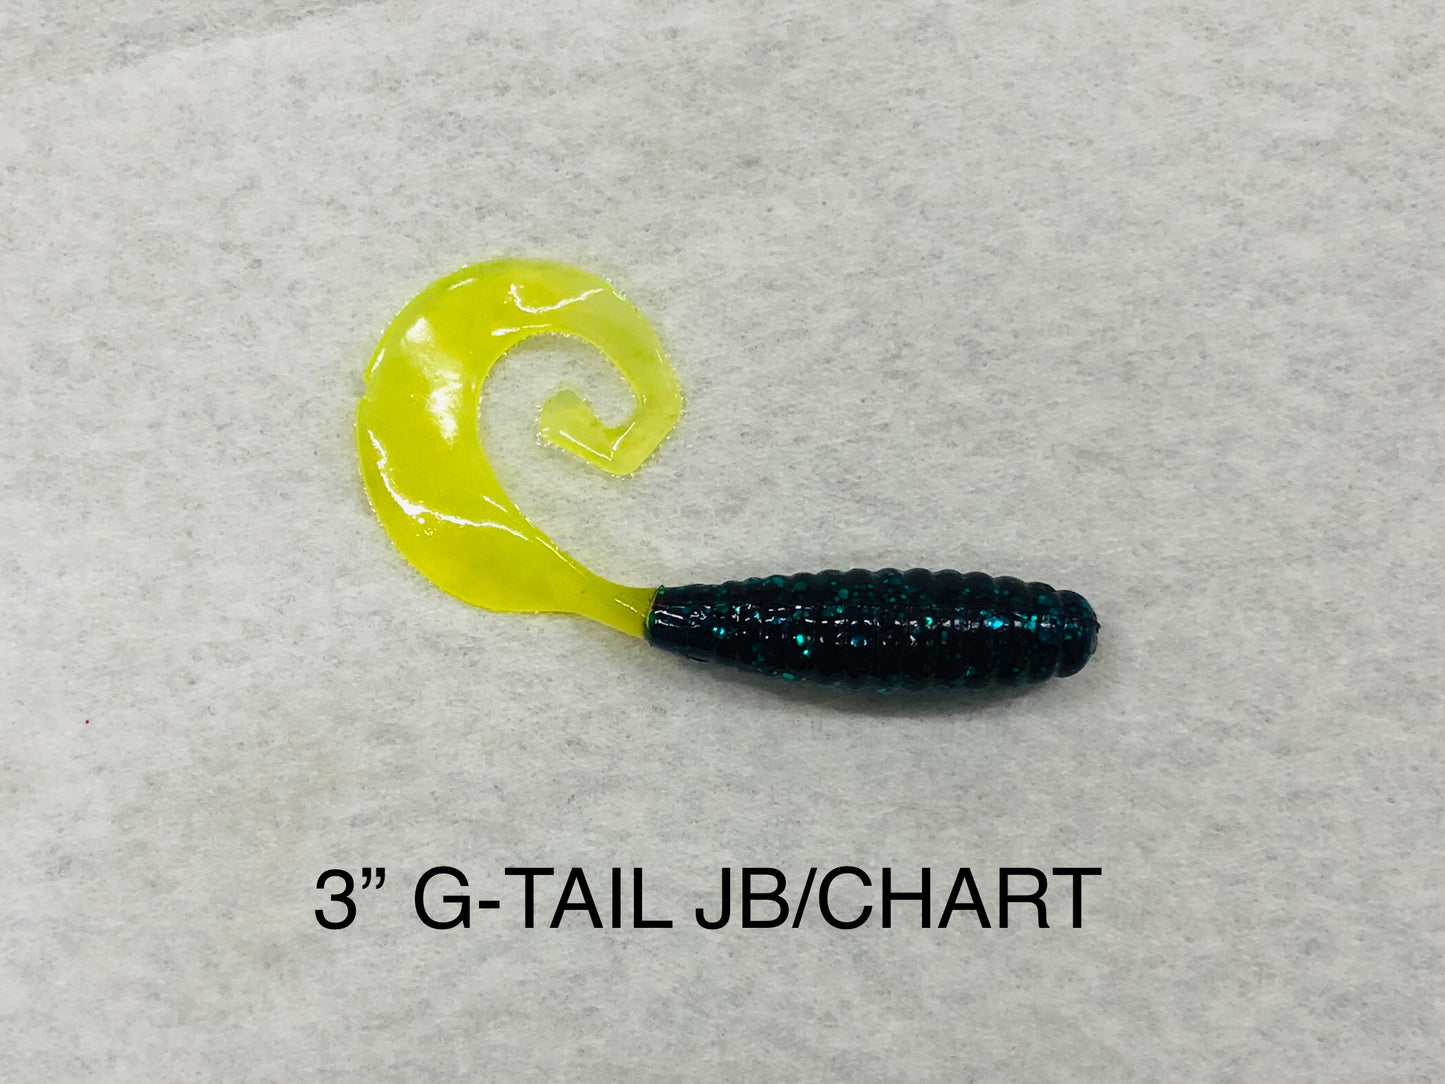 gitzit-g-tail-grub-junebug- chartreuse-3in-19400